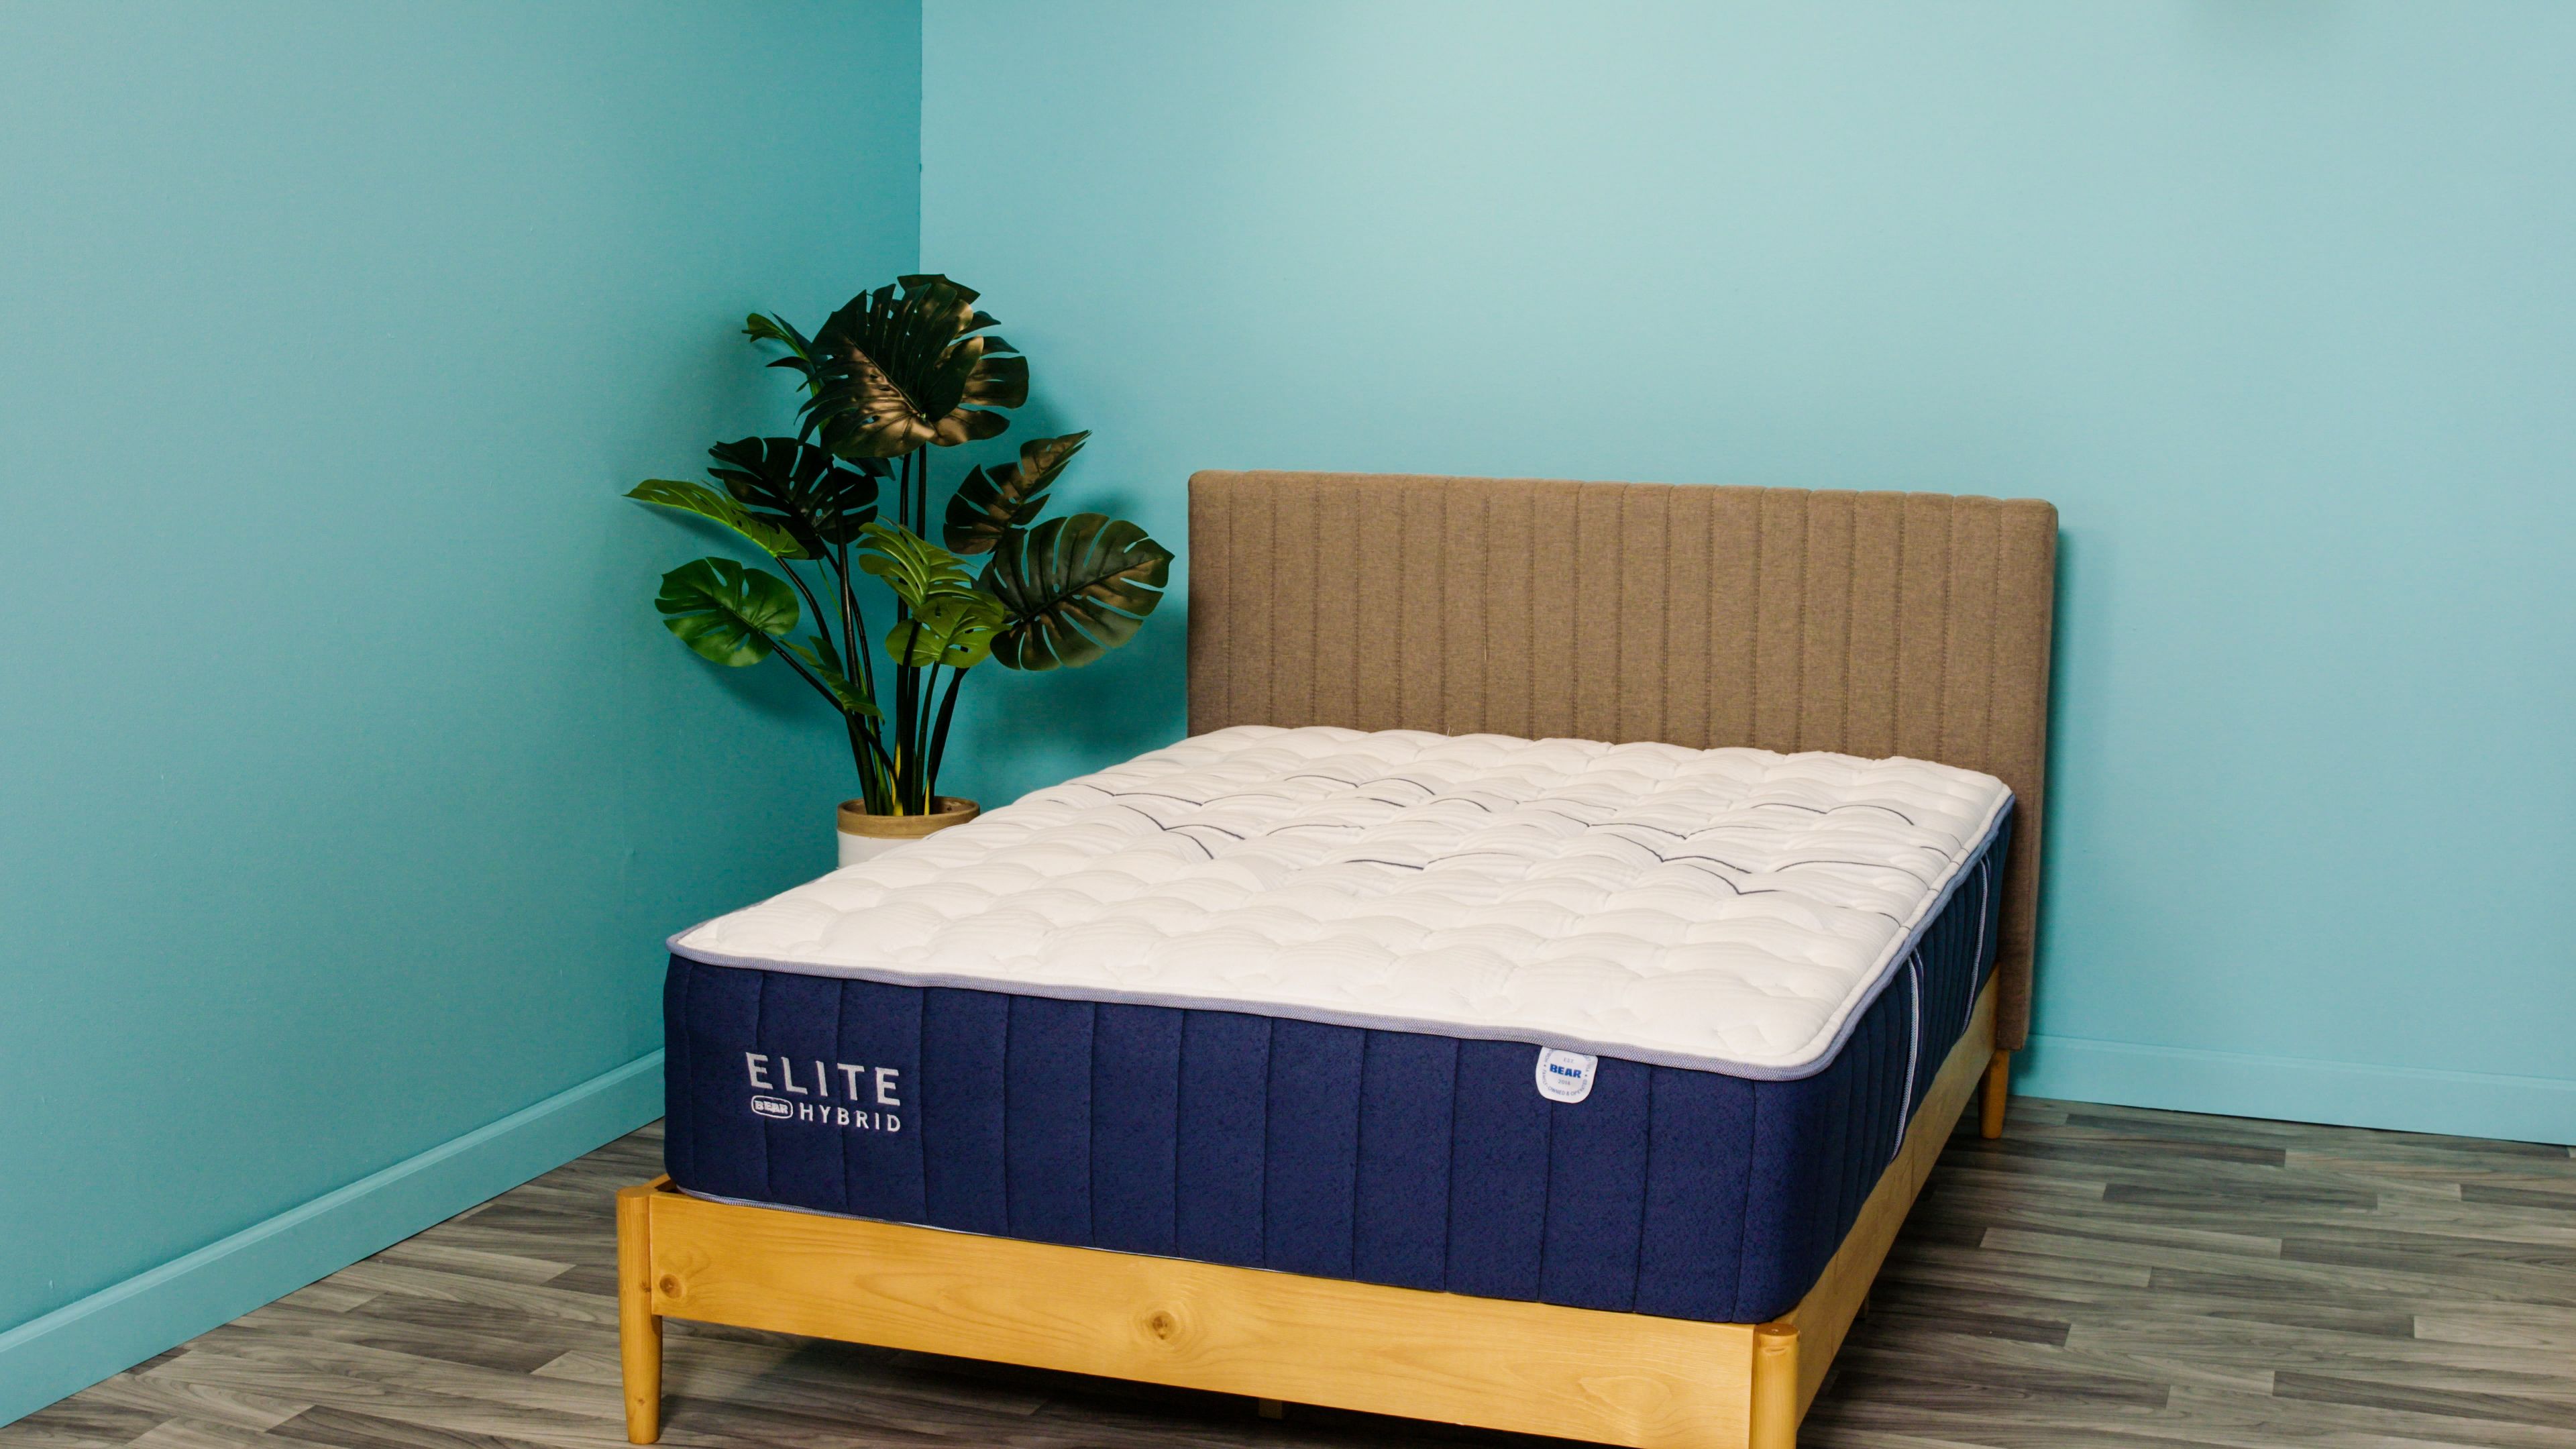 Five Ways to Make an Air Mattress Feel Like the Real Thing